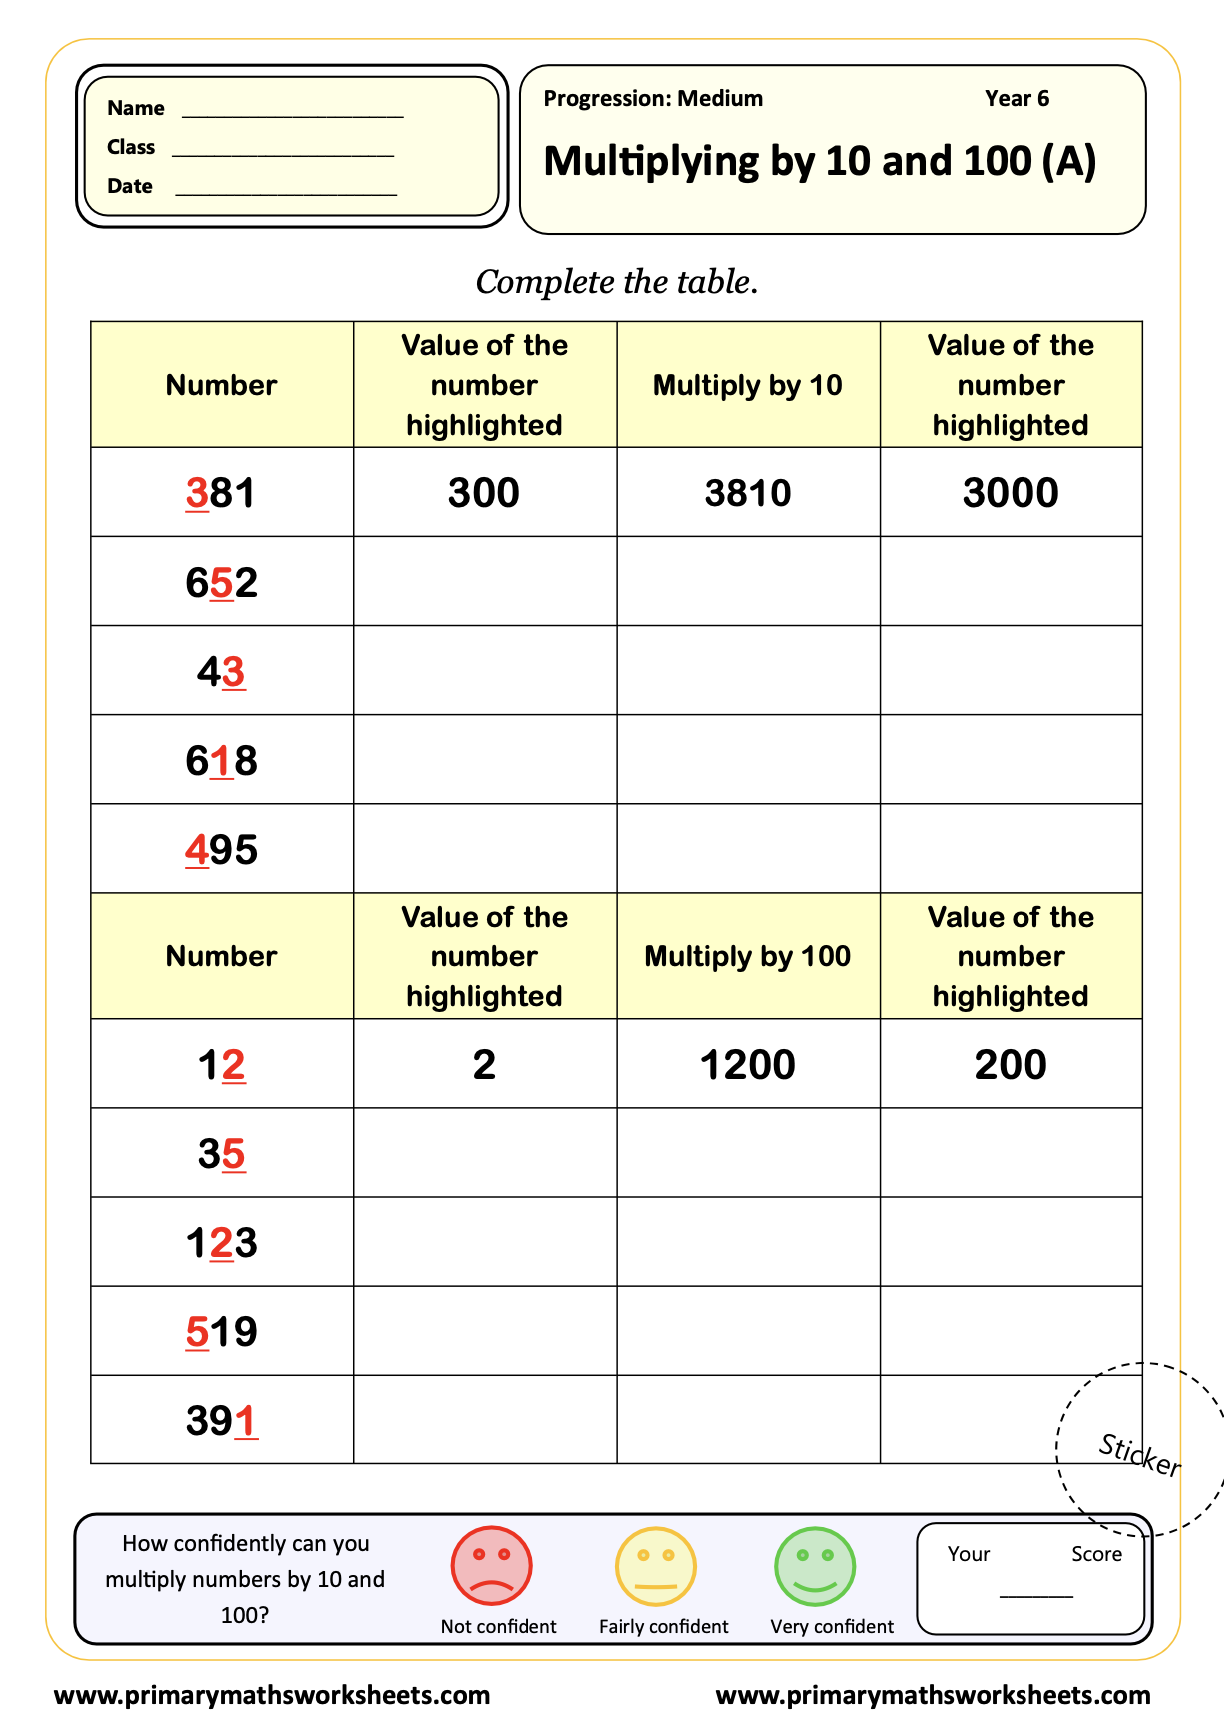 Year 6 Multiplying by 10 and 100 Worksheet